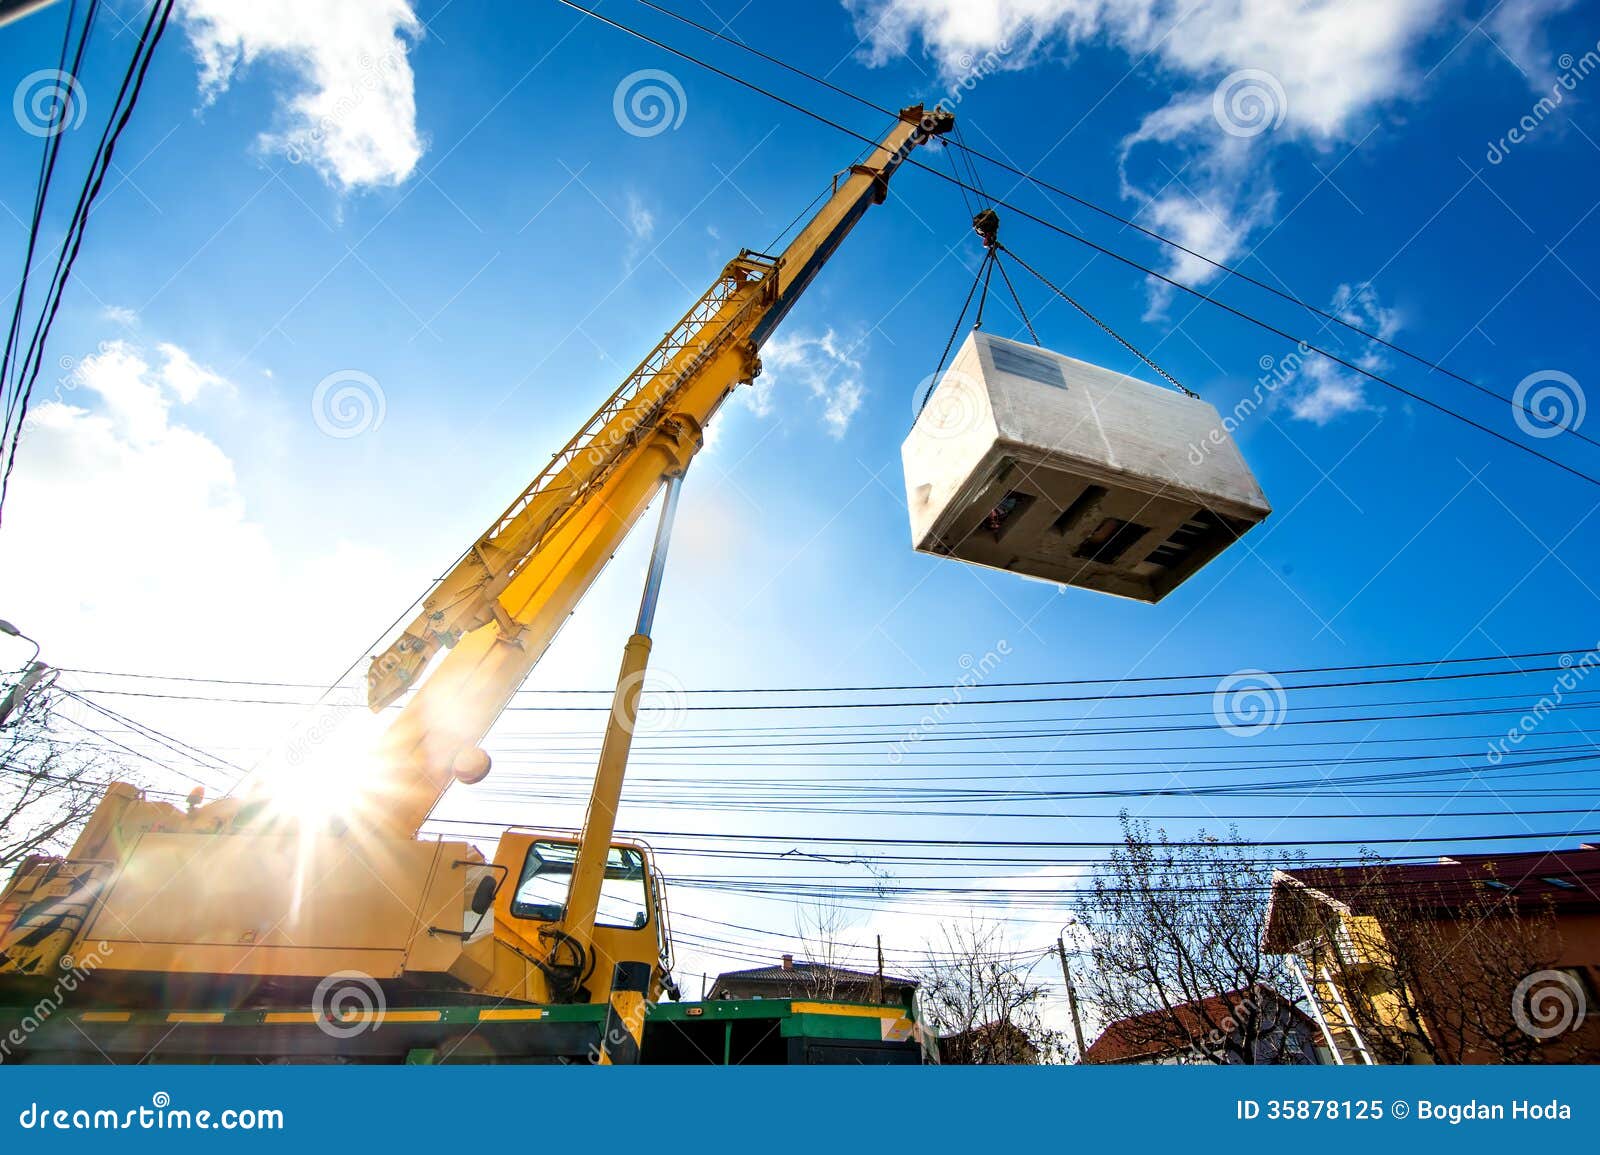 mobile crane operating by lifting an electric generator